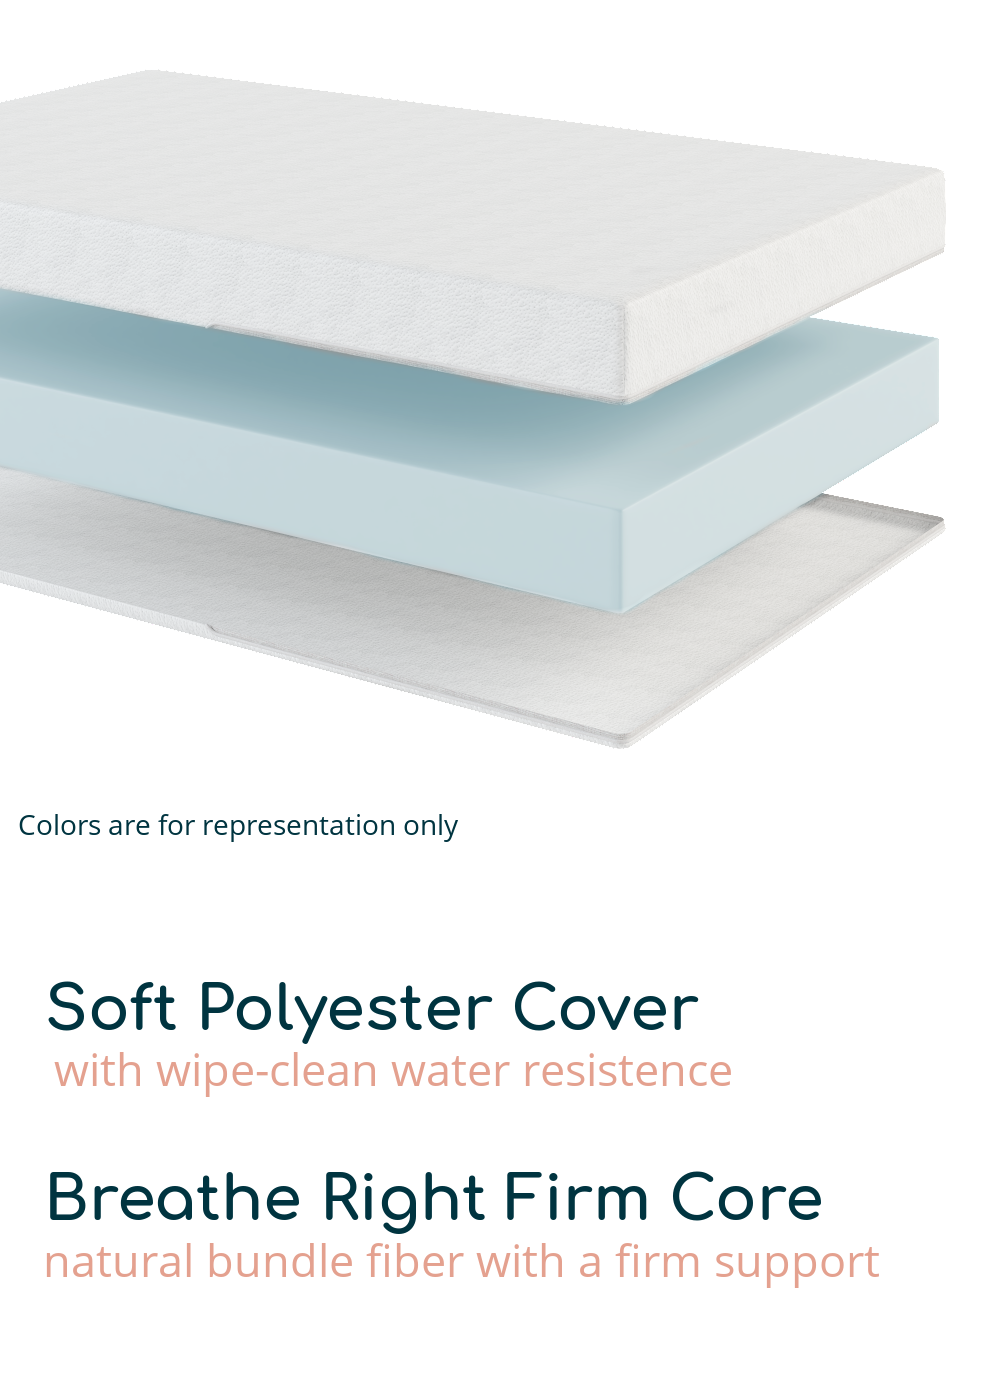 Soft Polyester Cover-with wipe clean resistance abd Breathe Right Firm Core-natural bundle fiber with a firm support for infants.